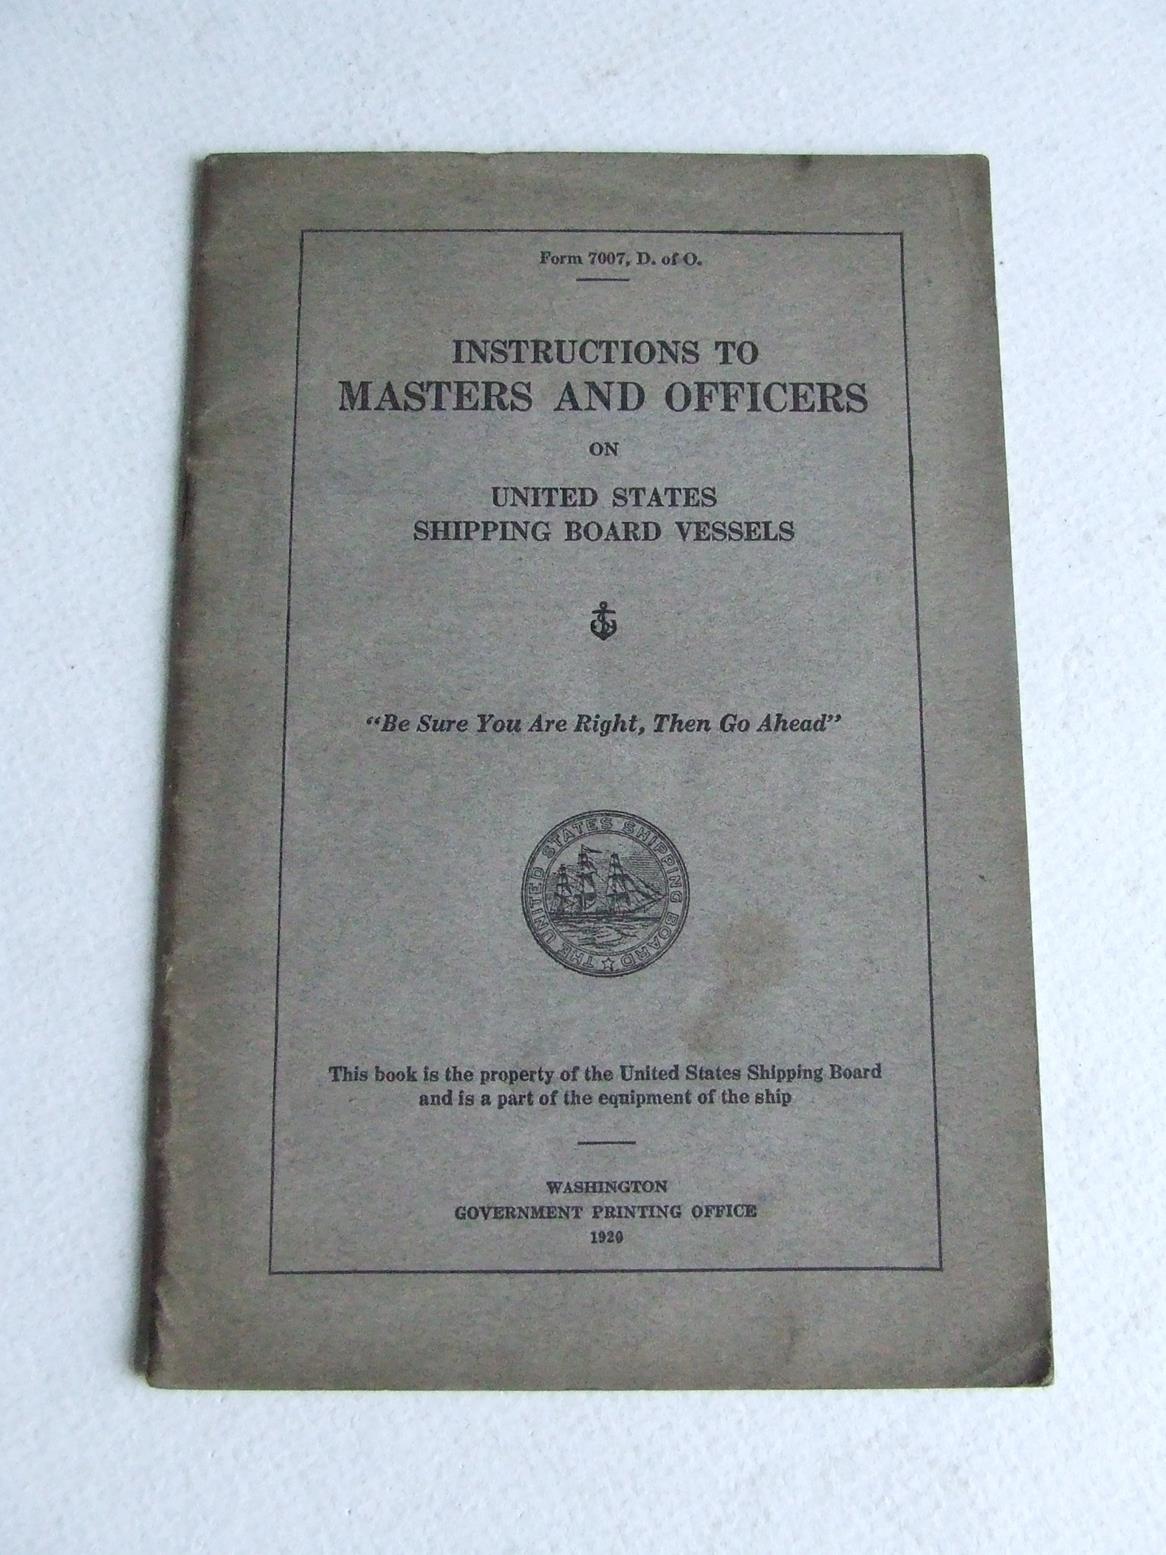 Instructions to Masters and Officers on United States Shipping Board Vessels